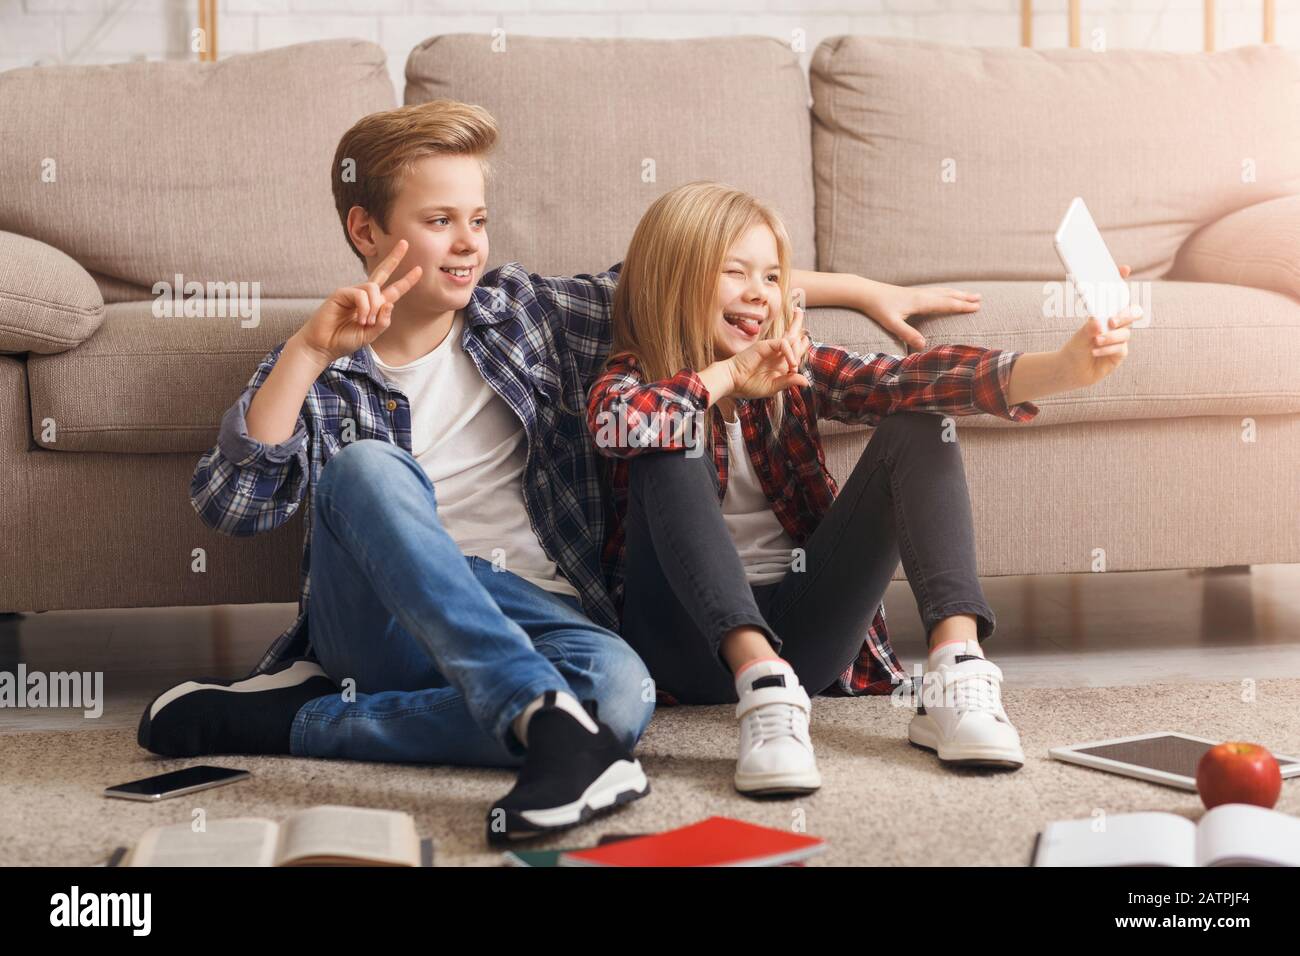 Brother And Sister Making Selfie Gesturing V-Sign Sitting On Floor Stock Photo